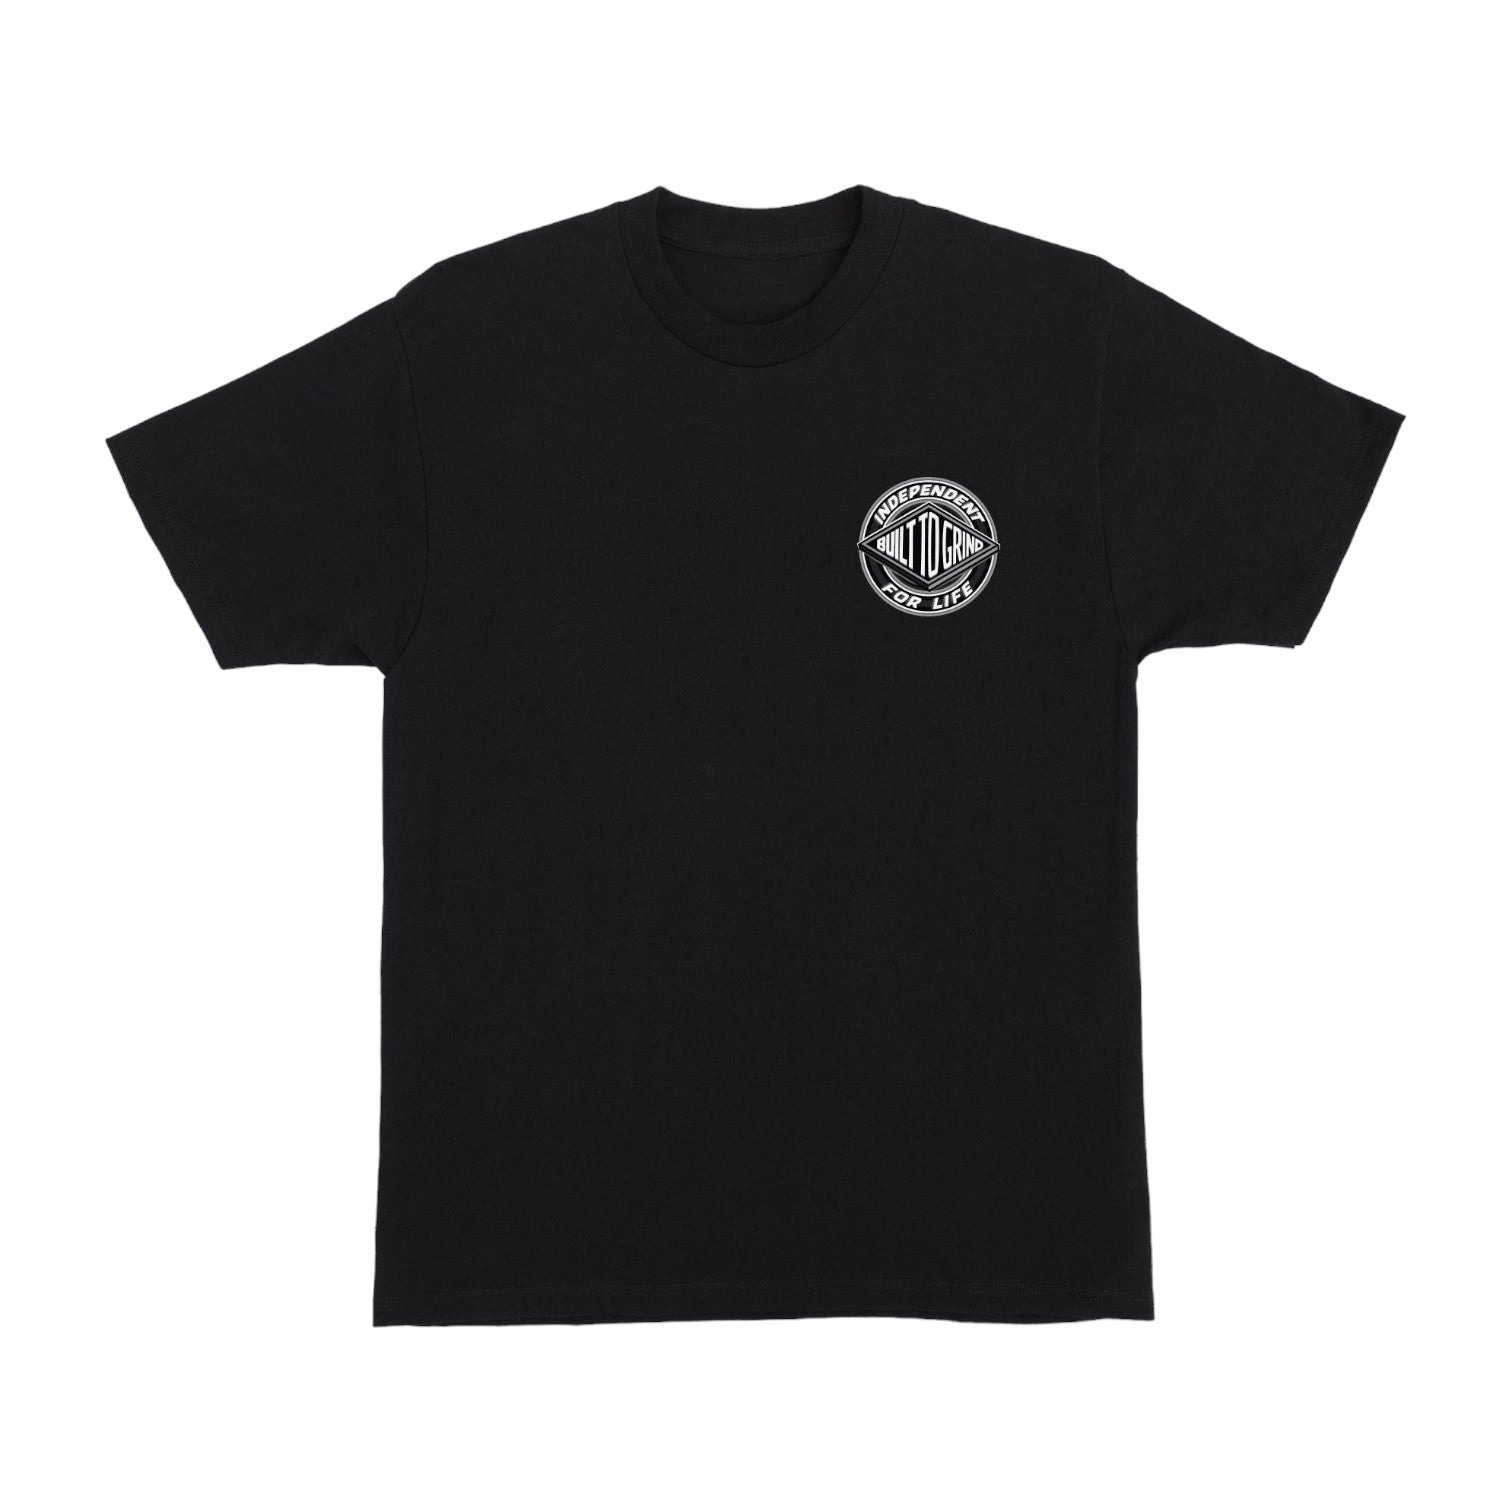 Independent For Life Clutch S/S Tee - Black